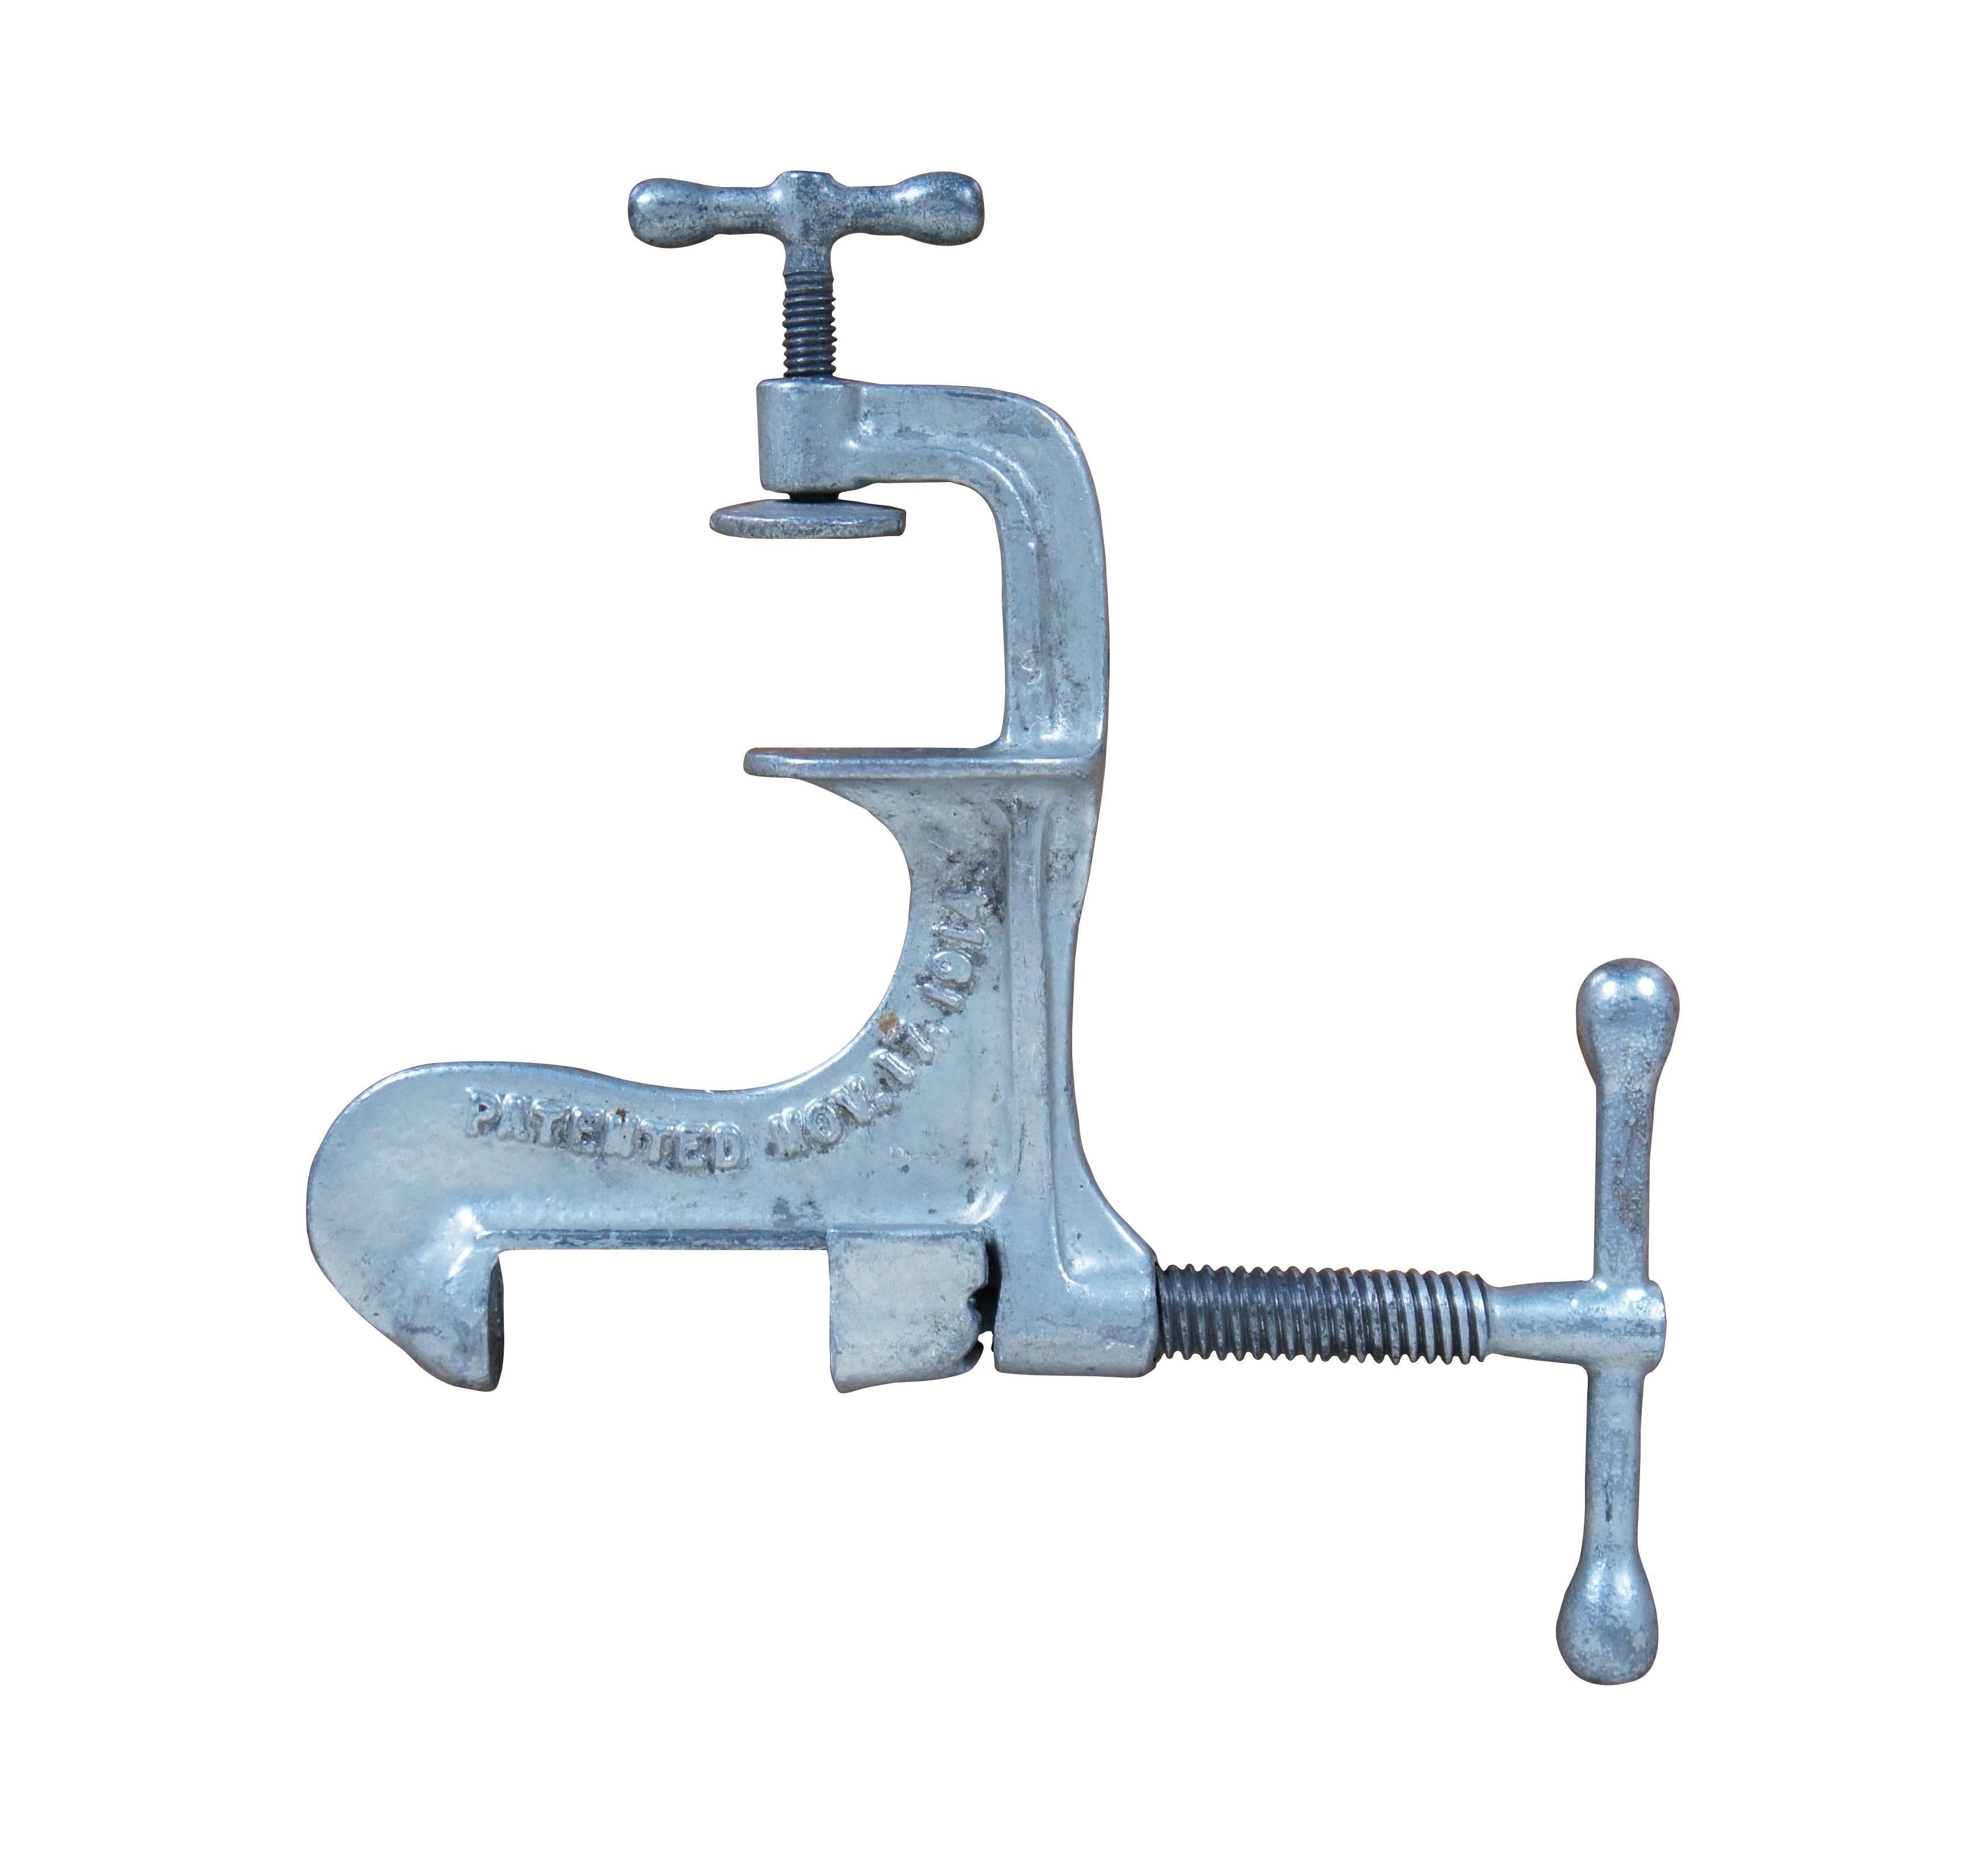 Early 20th century counter mounted vise style nut cracker by the Perfection Nut Cracker Company of Waco, Texas. Patented Nov. 17, 1914. 

Dimensions:
7